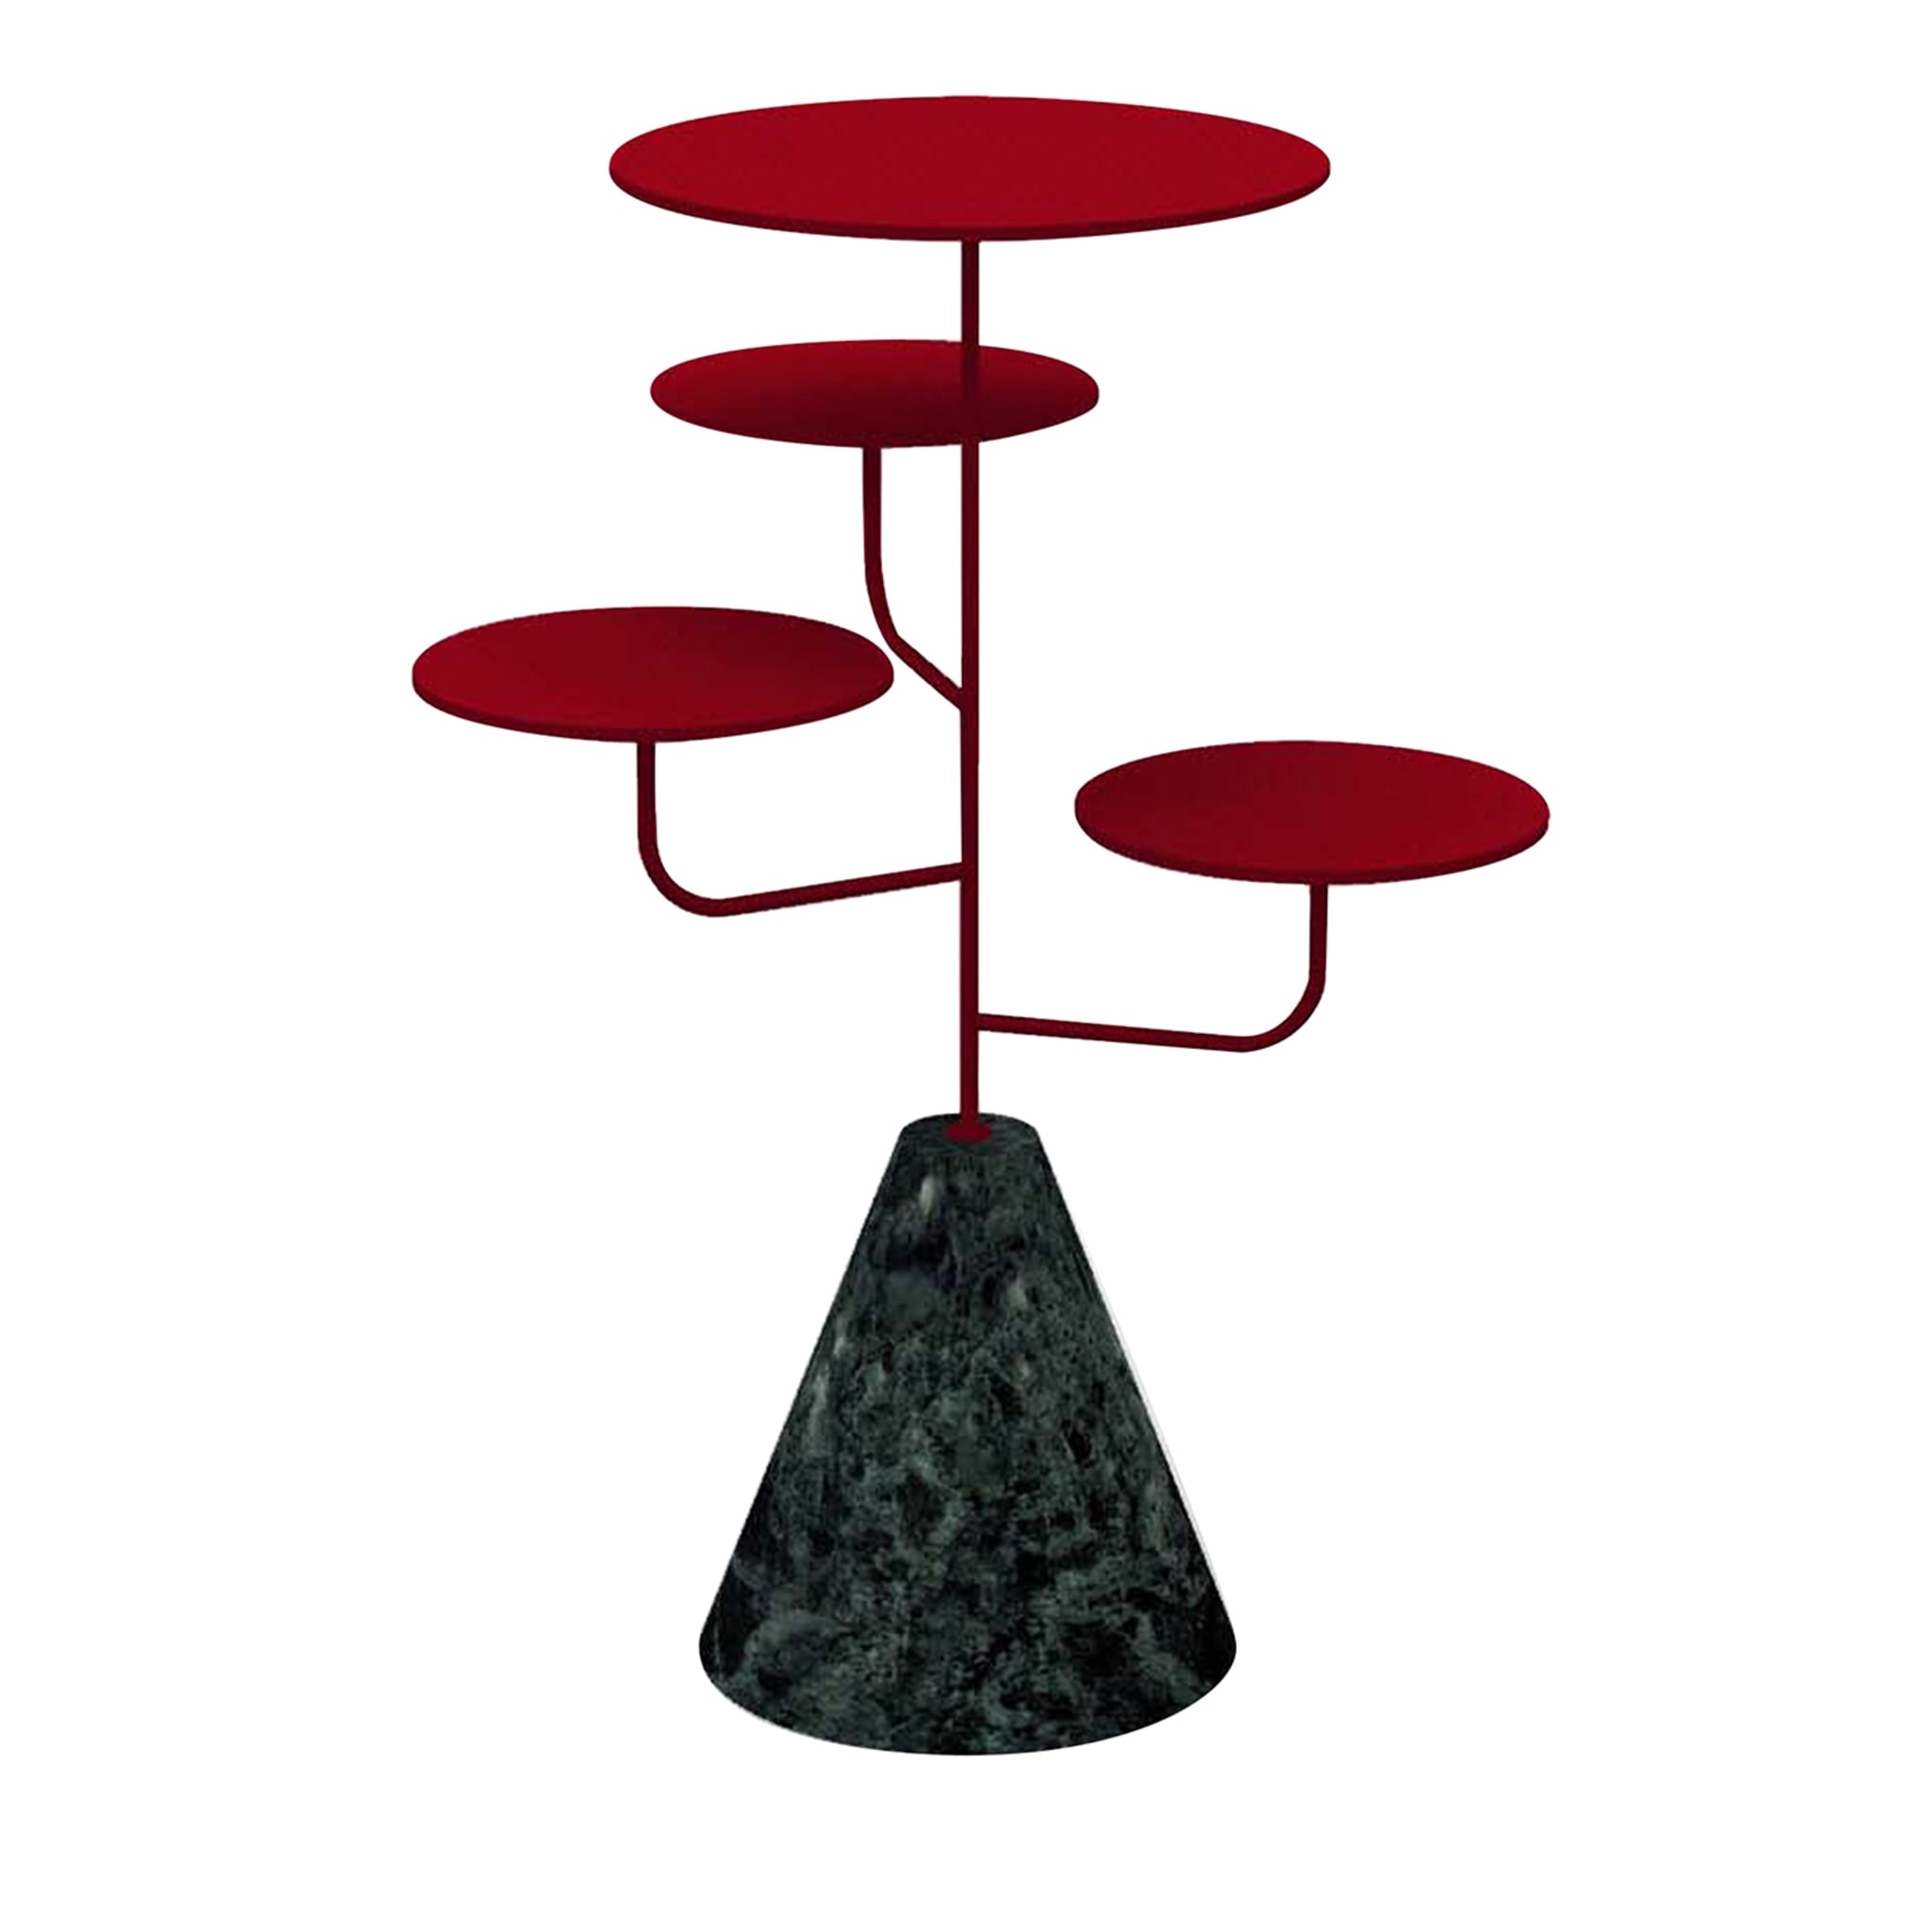 Condiviso 4-Tier Ruby Red/Green Guatemala Serving Stand - Main view